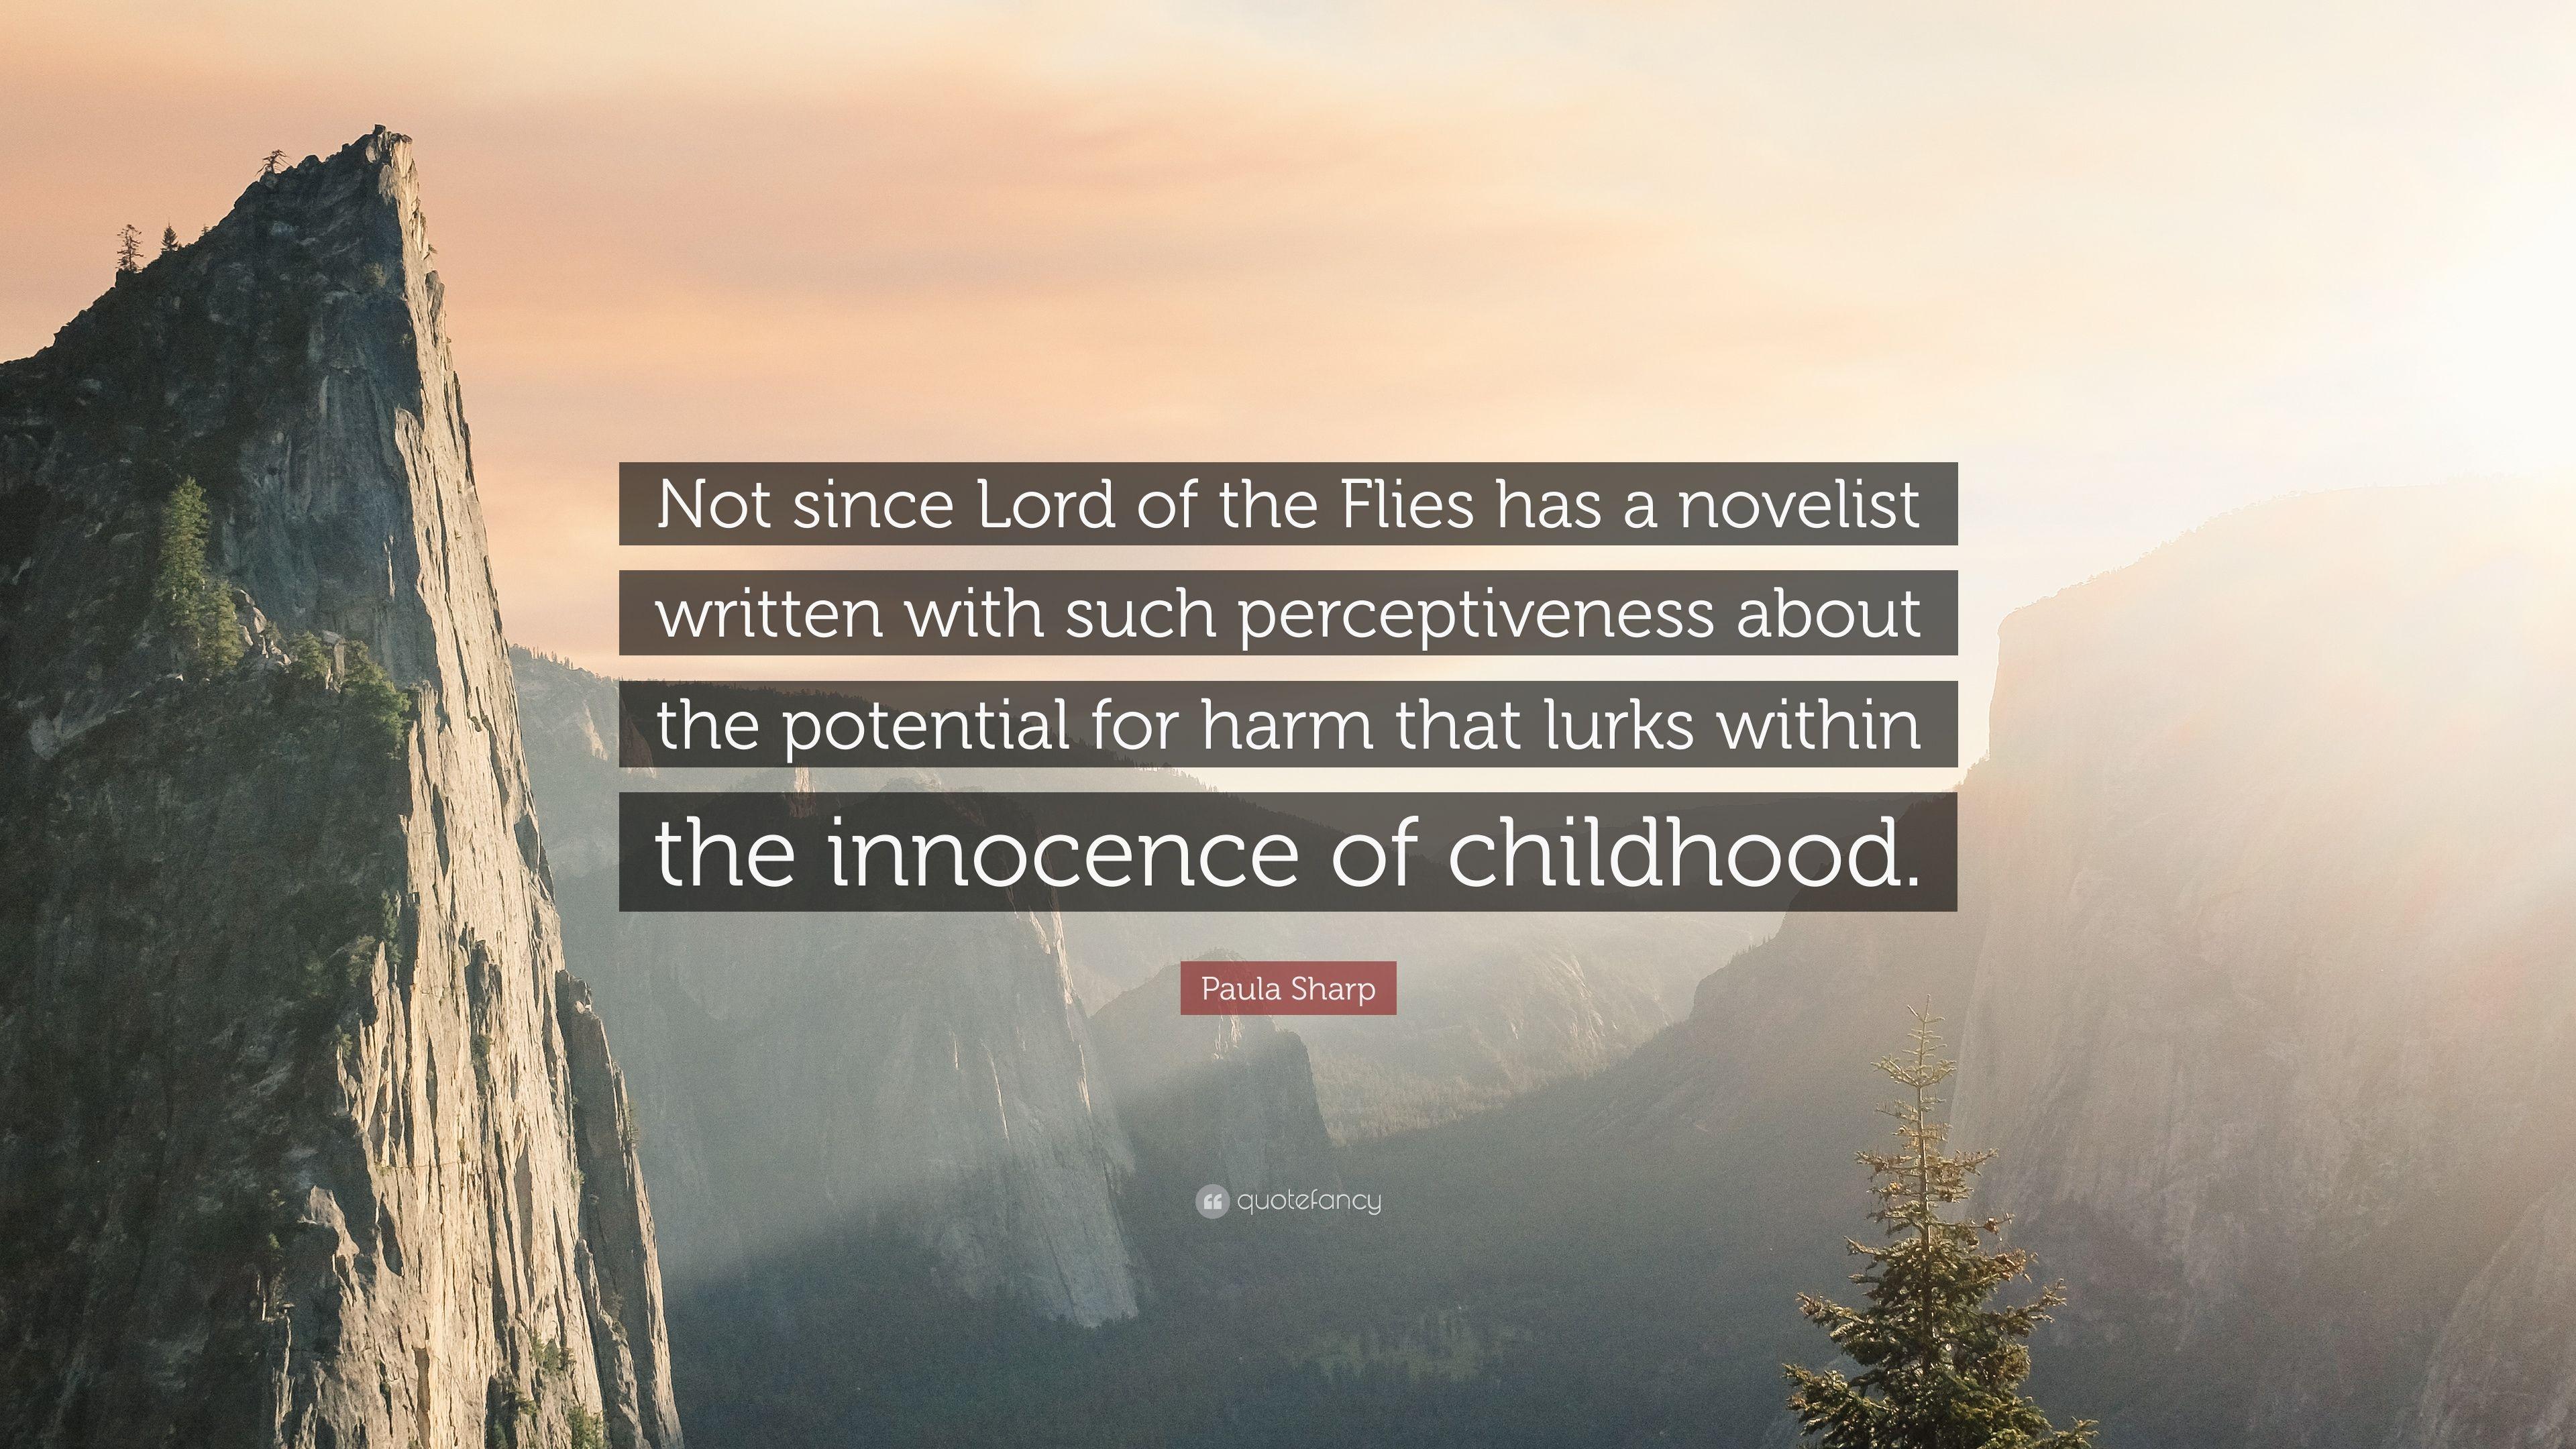 Paula Sharp Quote: “Not since Lord of the Flies has a novelist